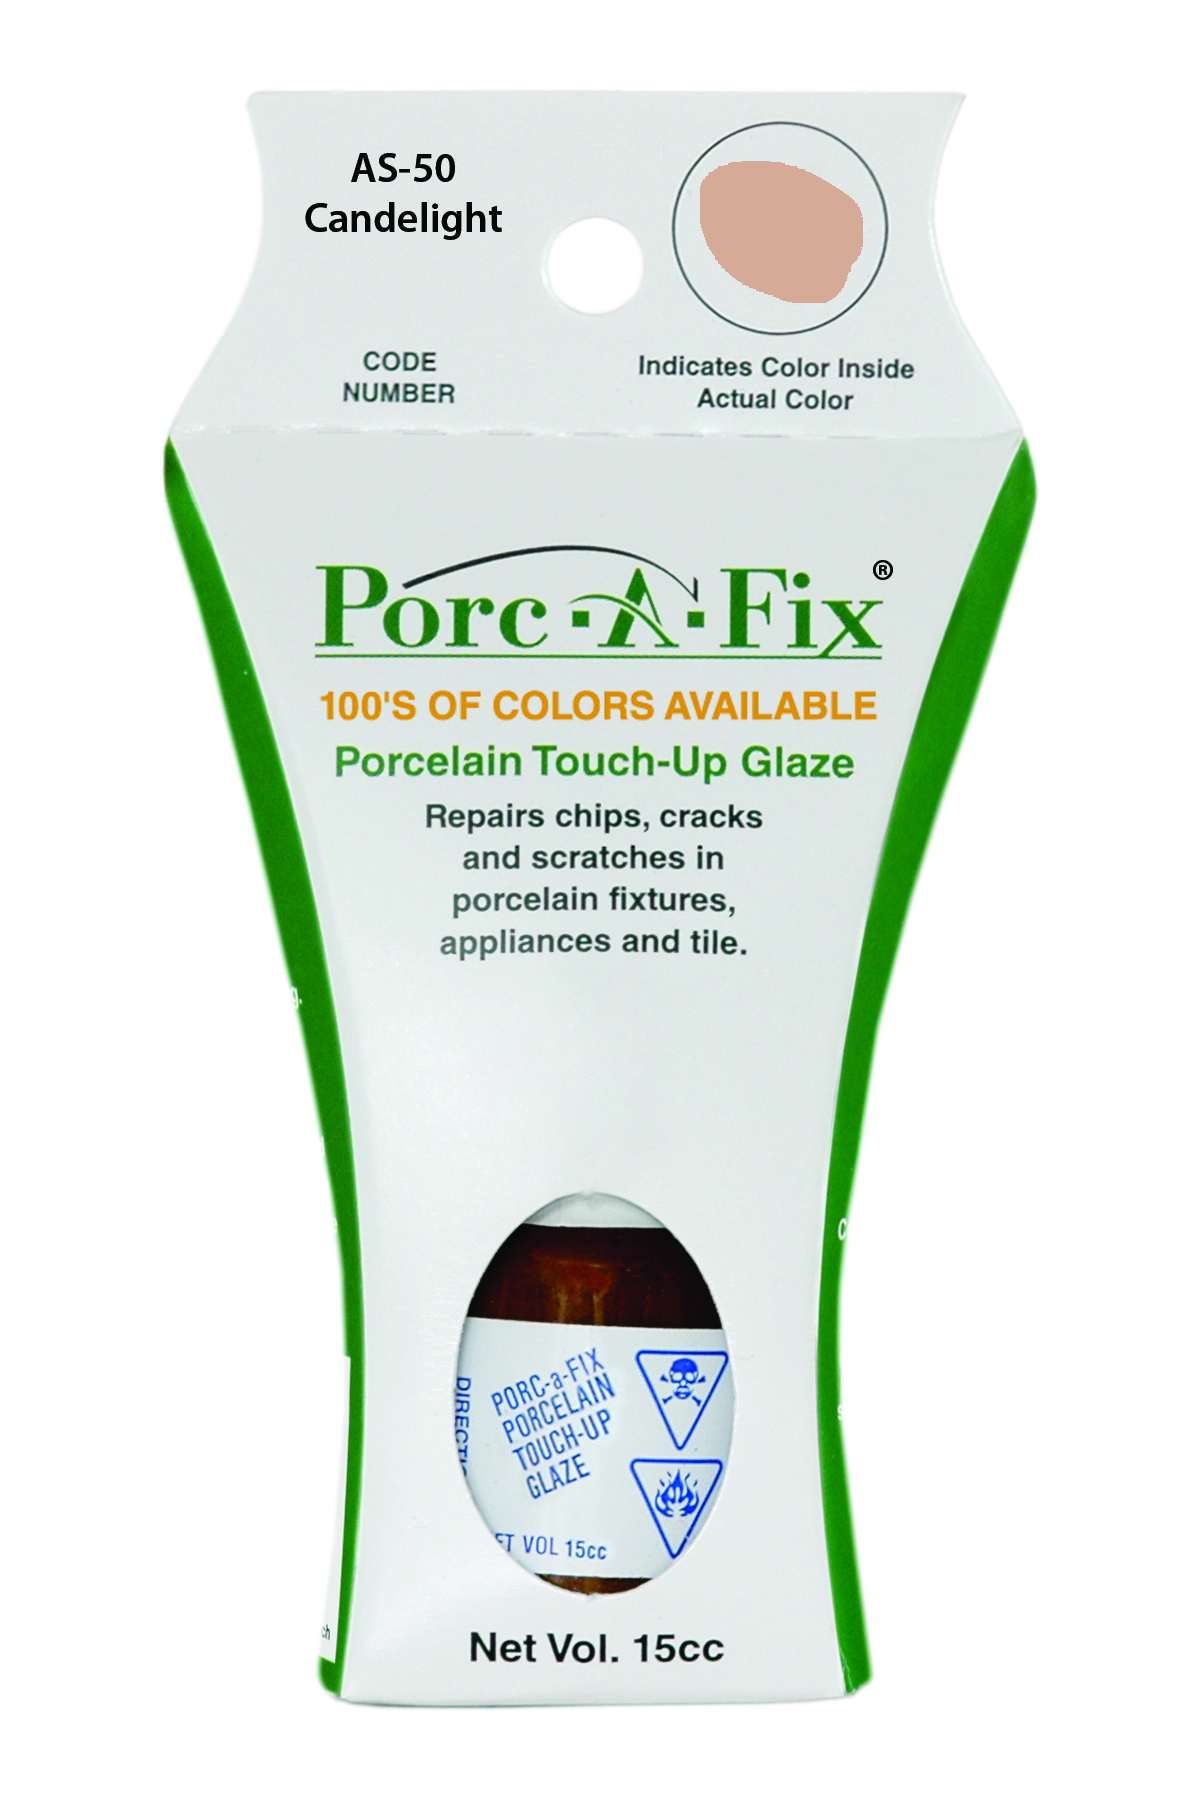 Fixture-Fix | AS-50 | Porc-A-Fix Touch-Up Glaze American Standard Candelyght - Compatible with American Standard 070900-2020A Touch Up Paint Kit - CANDELYGHT